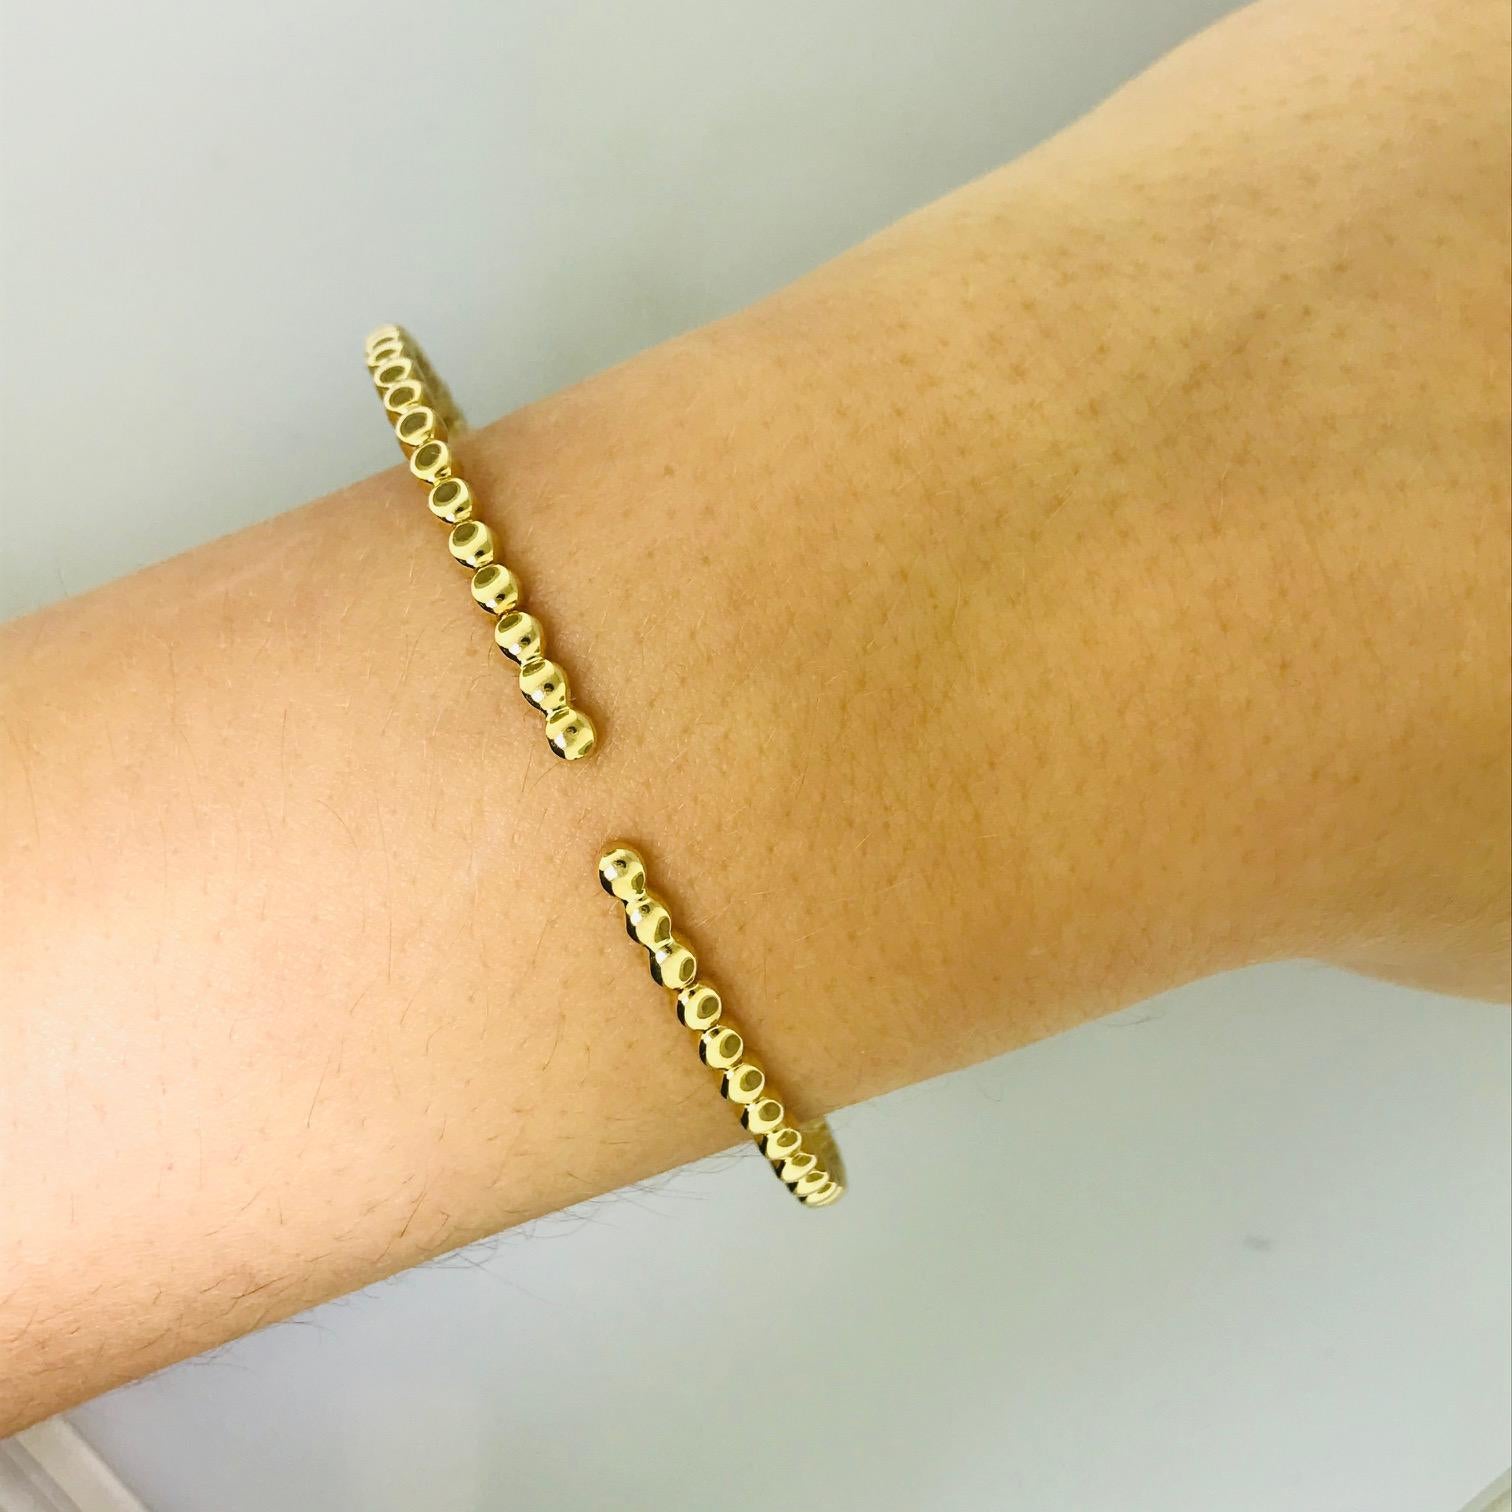 FUN! COLLECTIBLE! DESIGNER! FASHION BANGLE BRACELET! 

This fun designer bangle bracelet is so adorable and looks great on everyone! The bracelet is 14 karat yellow gold and flexible, meant to fit any wrist! With a unique bead-like design this